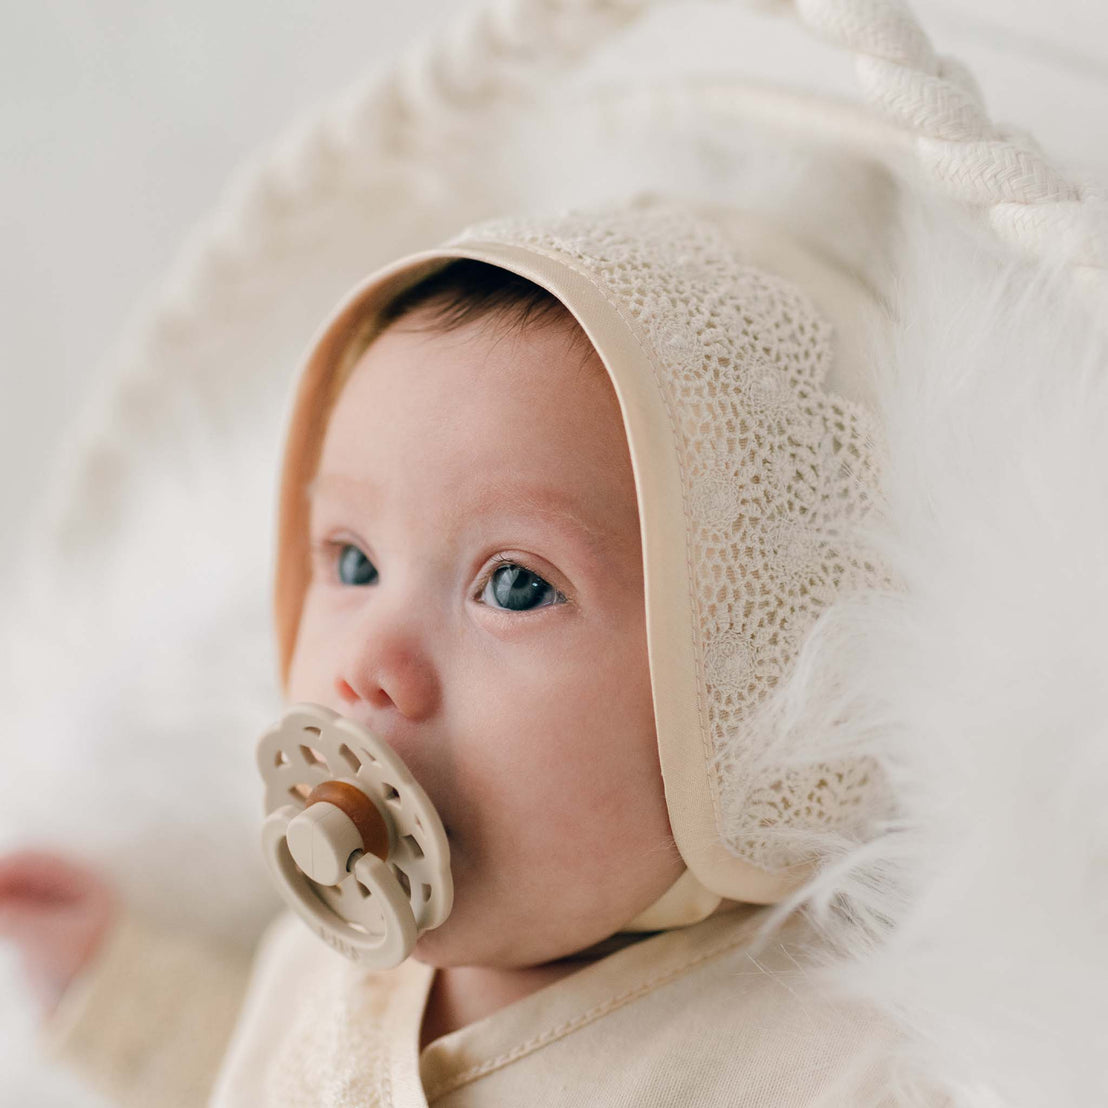 A close-up of a newborn girl with blue eyes and a pacifier, wearing a Mia Knot Gown & Bonnet, lying on a white fluffy blanket.